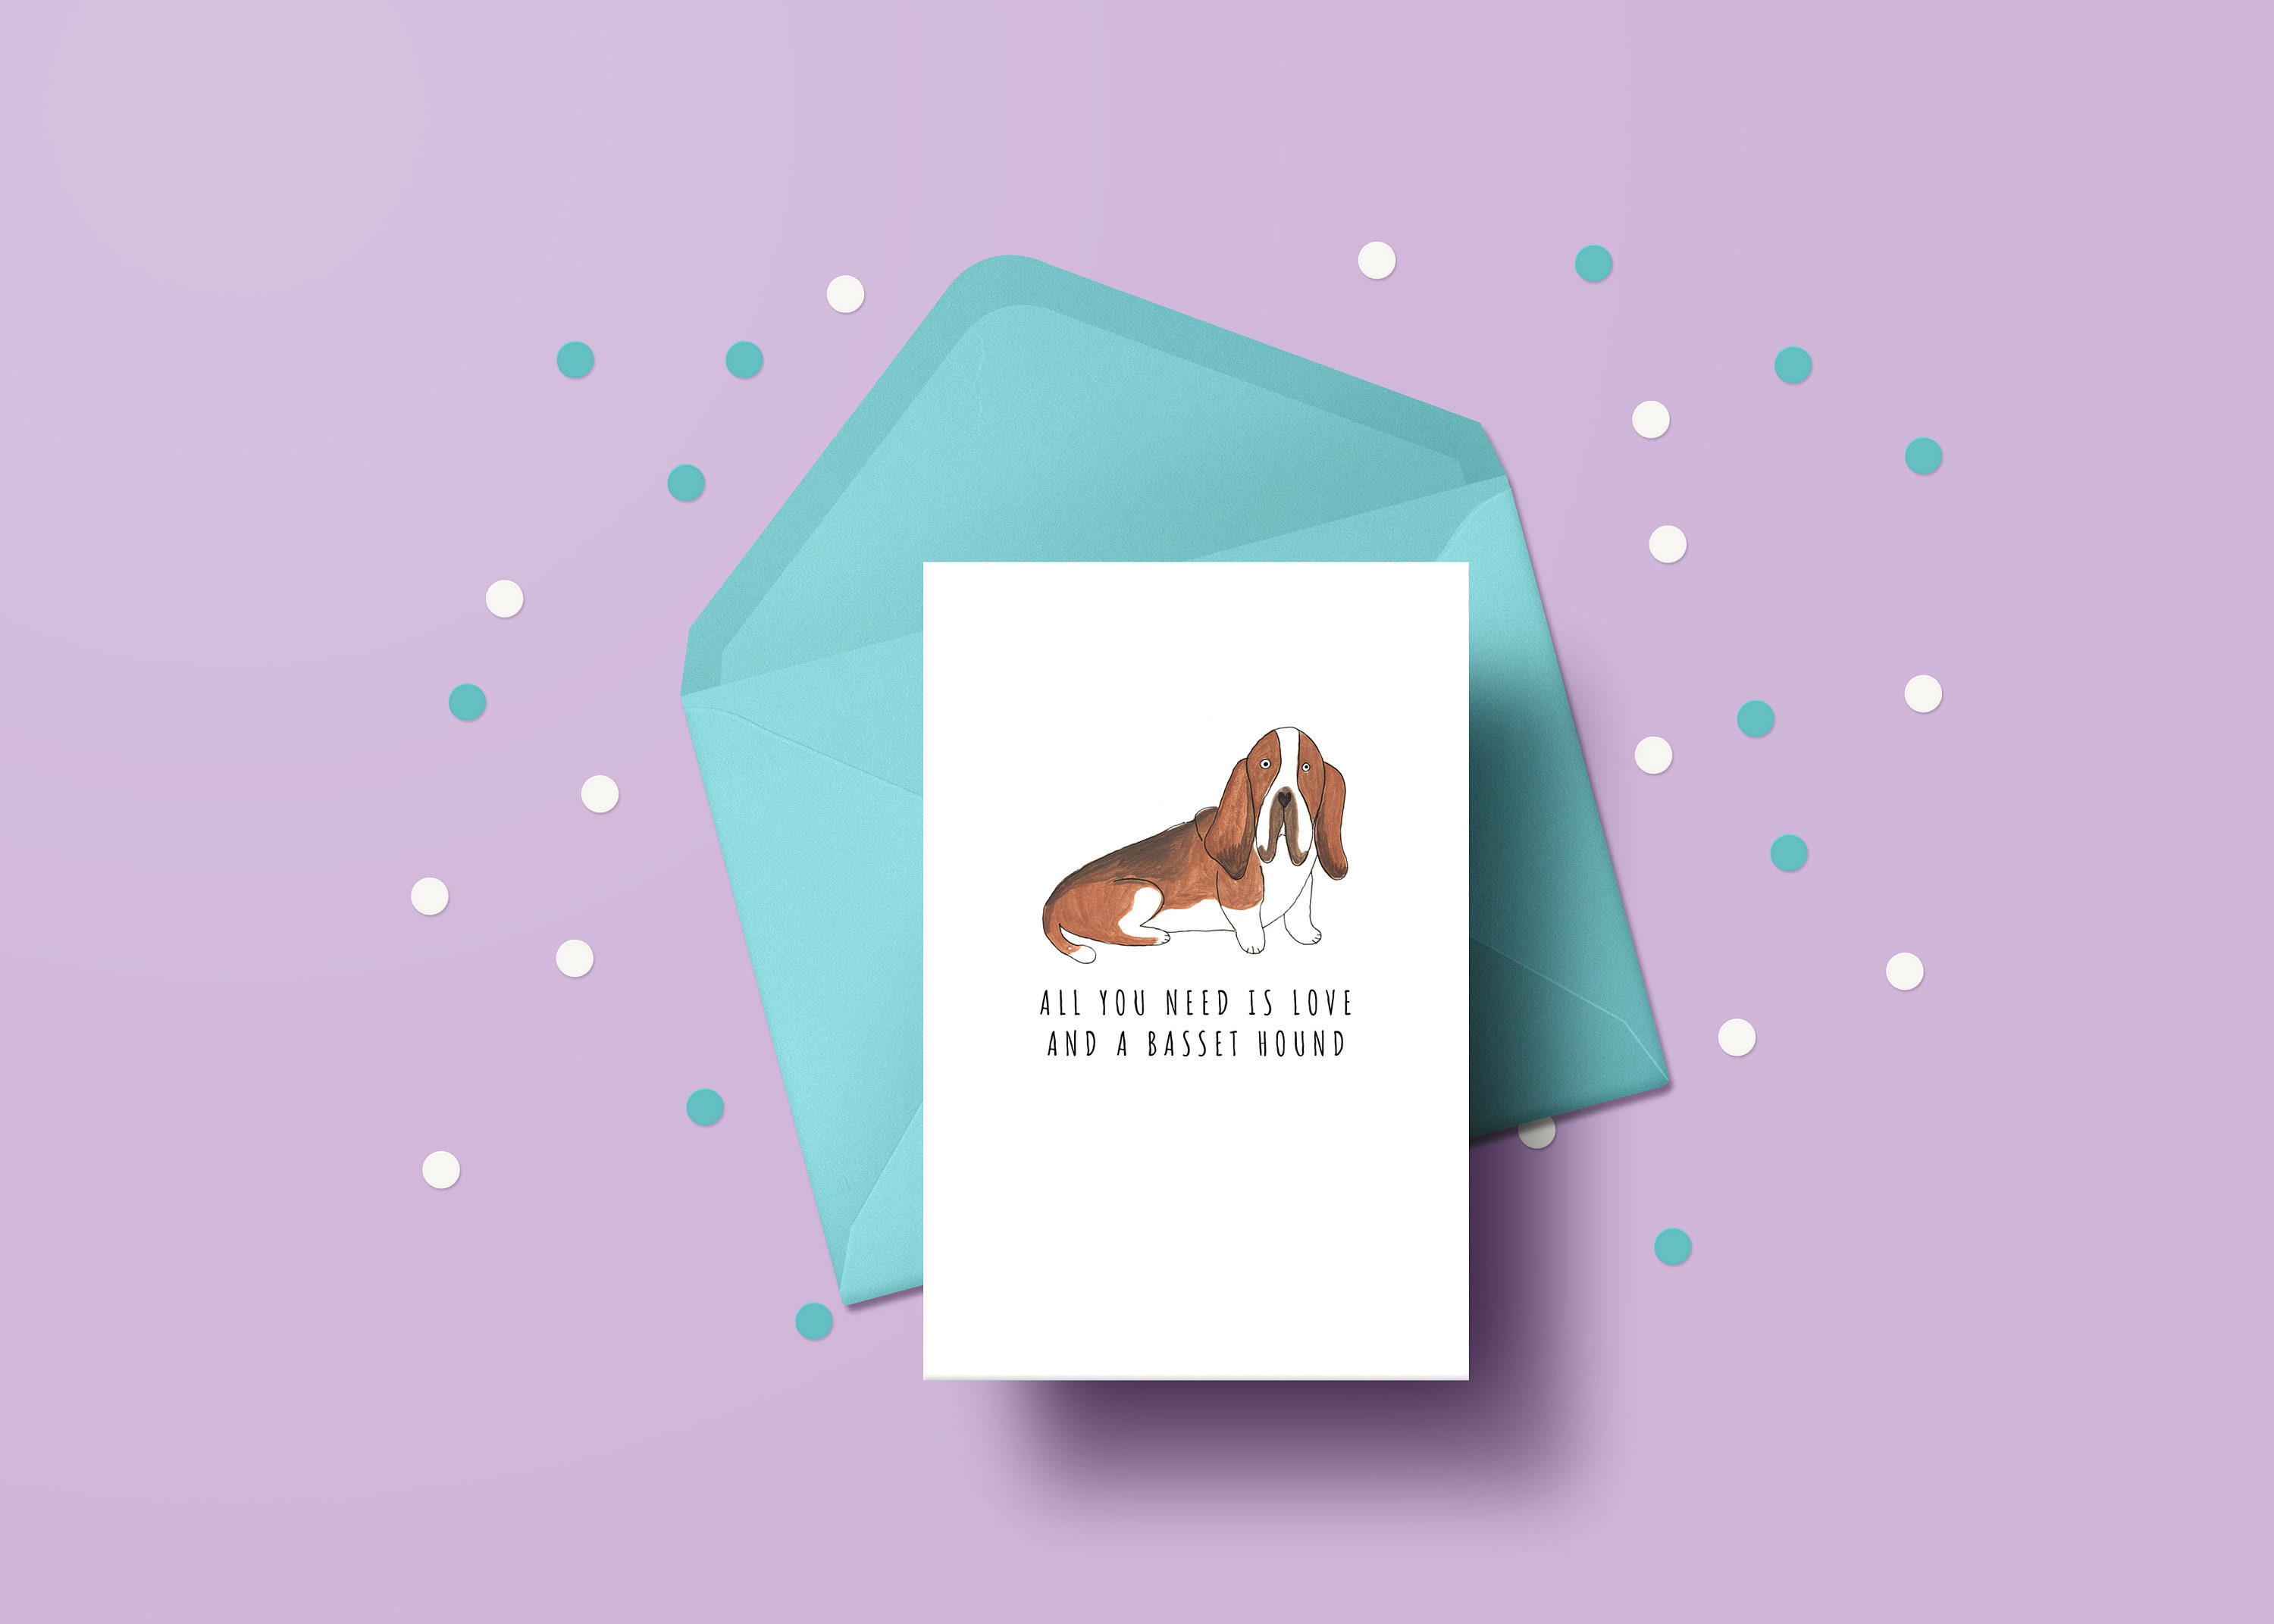 Joyriza All You Need is Love and A Dog – Funny Gifts for Dog Lovers Dog Mom